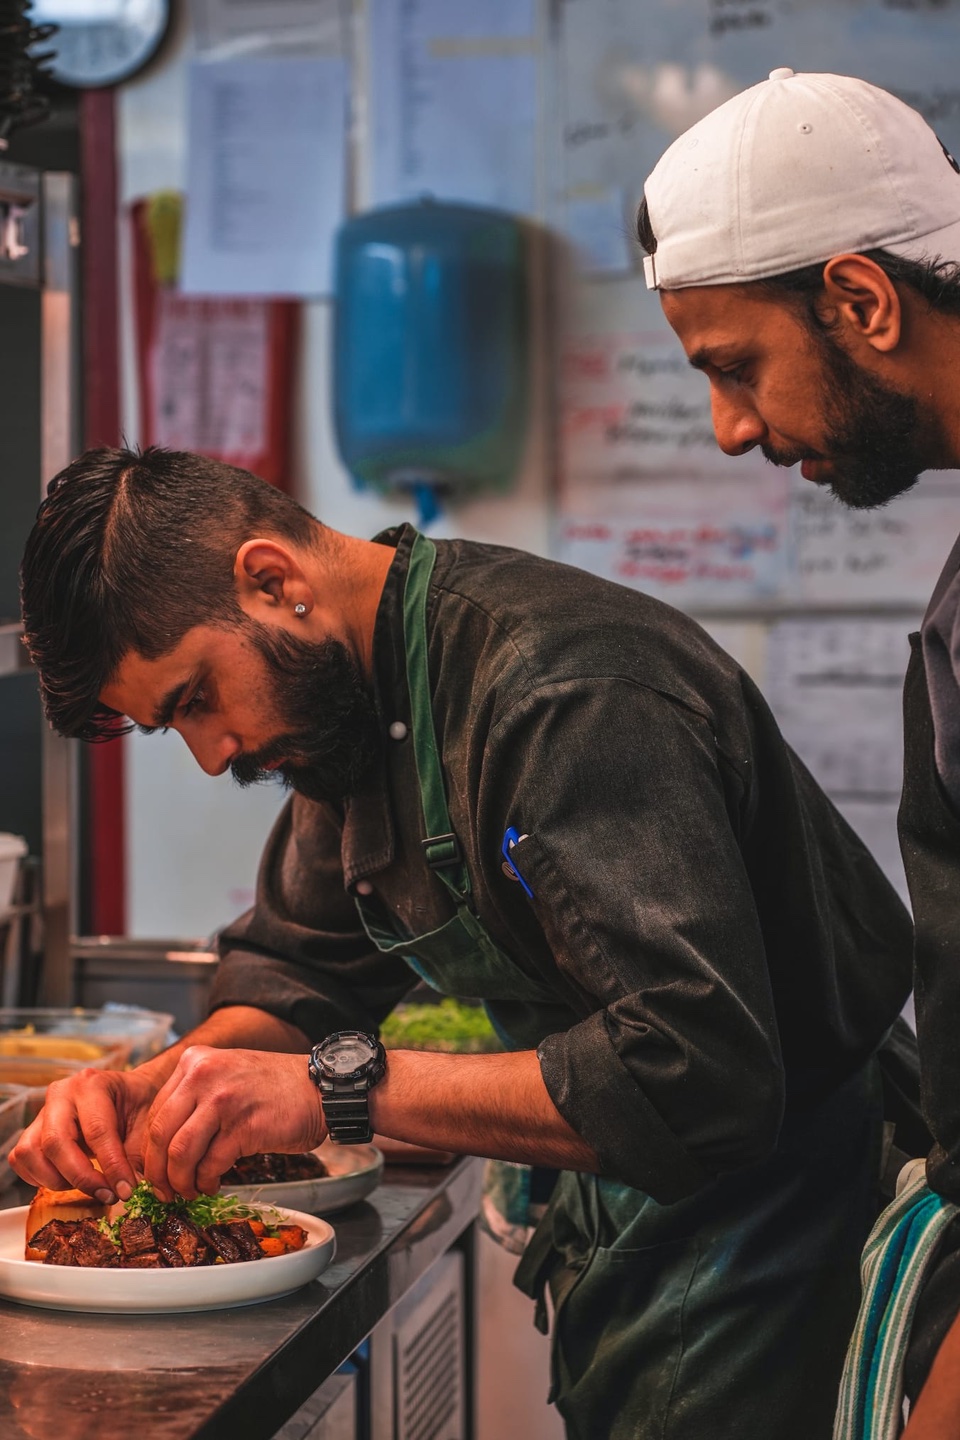 One chef putting together a dish while another watches